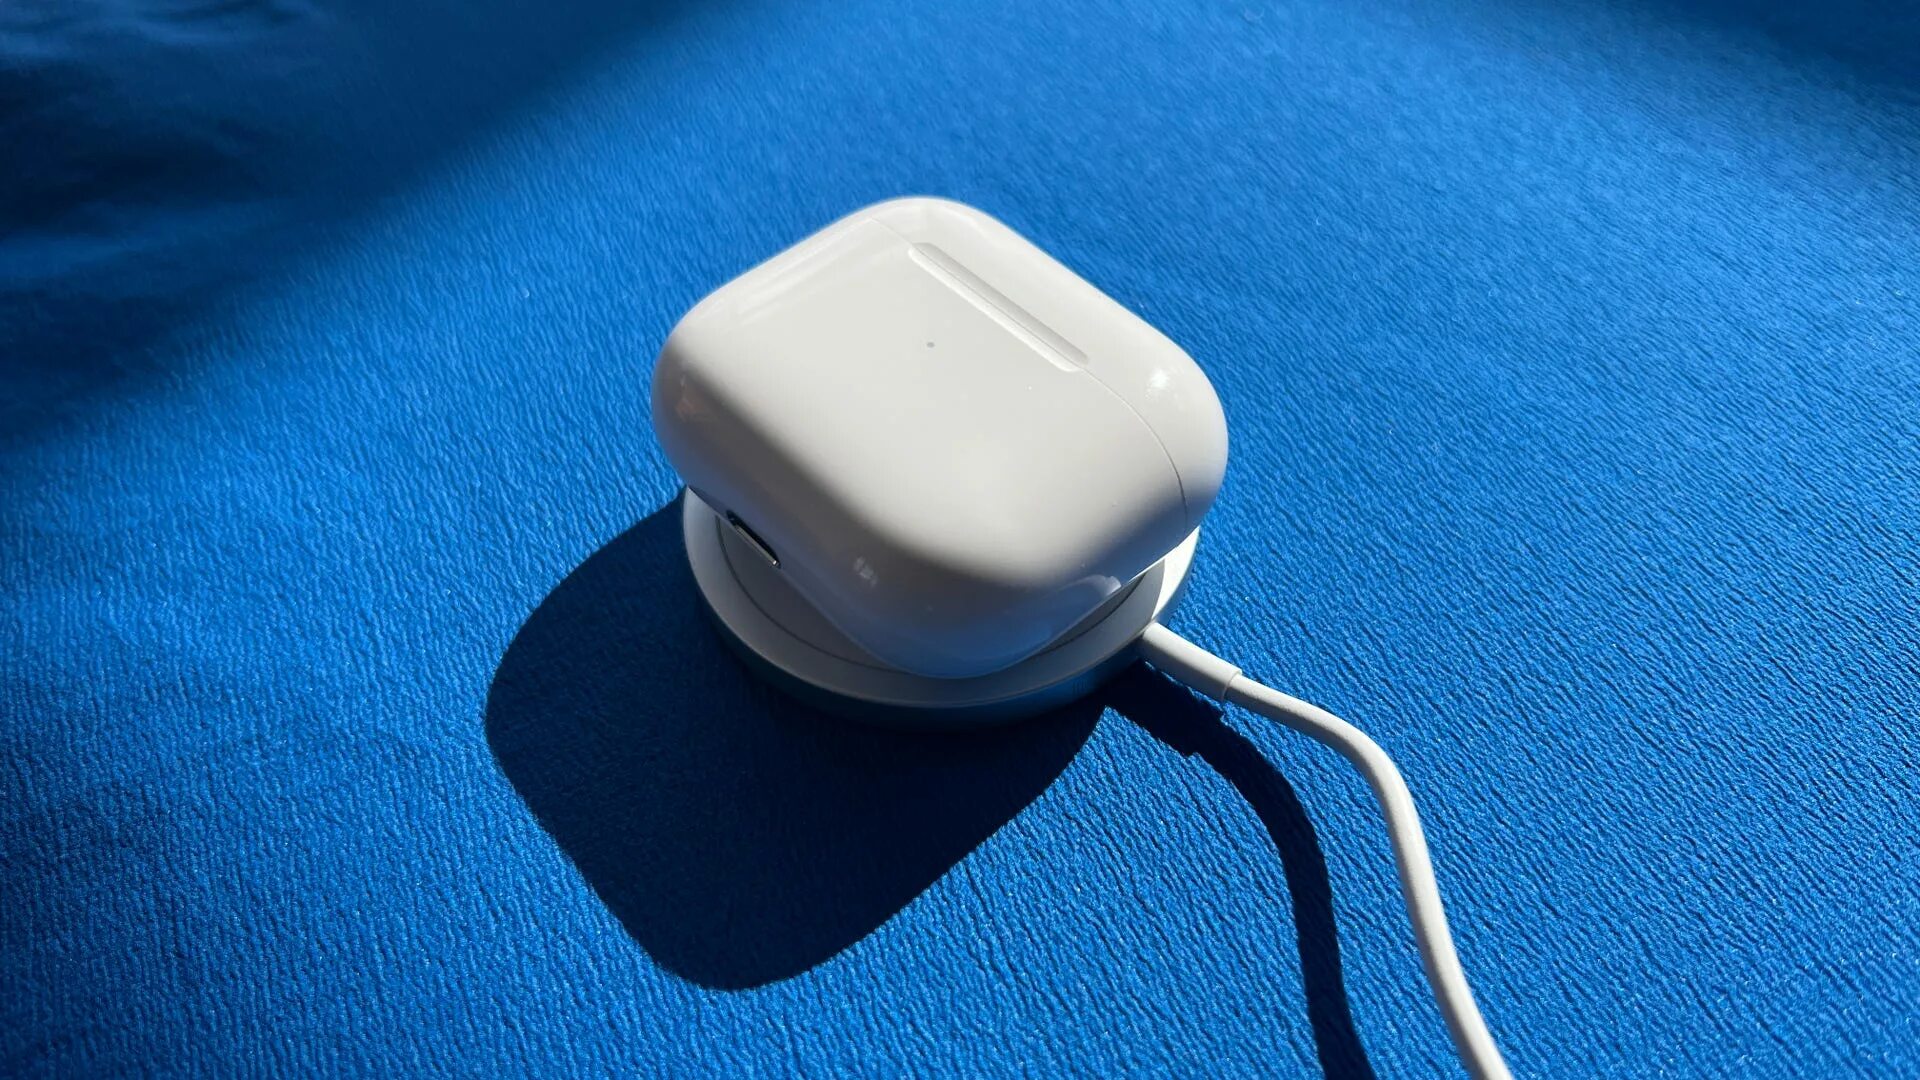 Apple AIRPODS Pro 2 MAGSAFE. Apple AIRPODS Pro MAGSAFE 2021. AIRPODS 3 Pro MAGSAFE. Air pods 3 MAGSAFE.